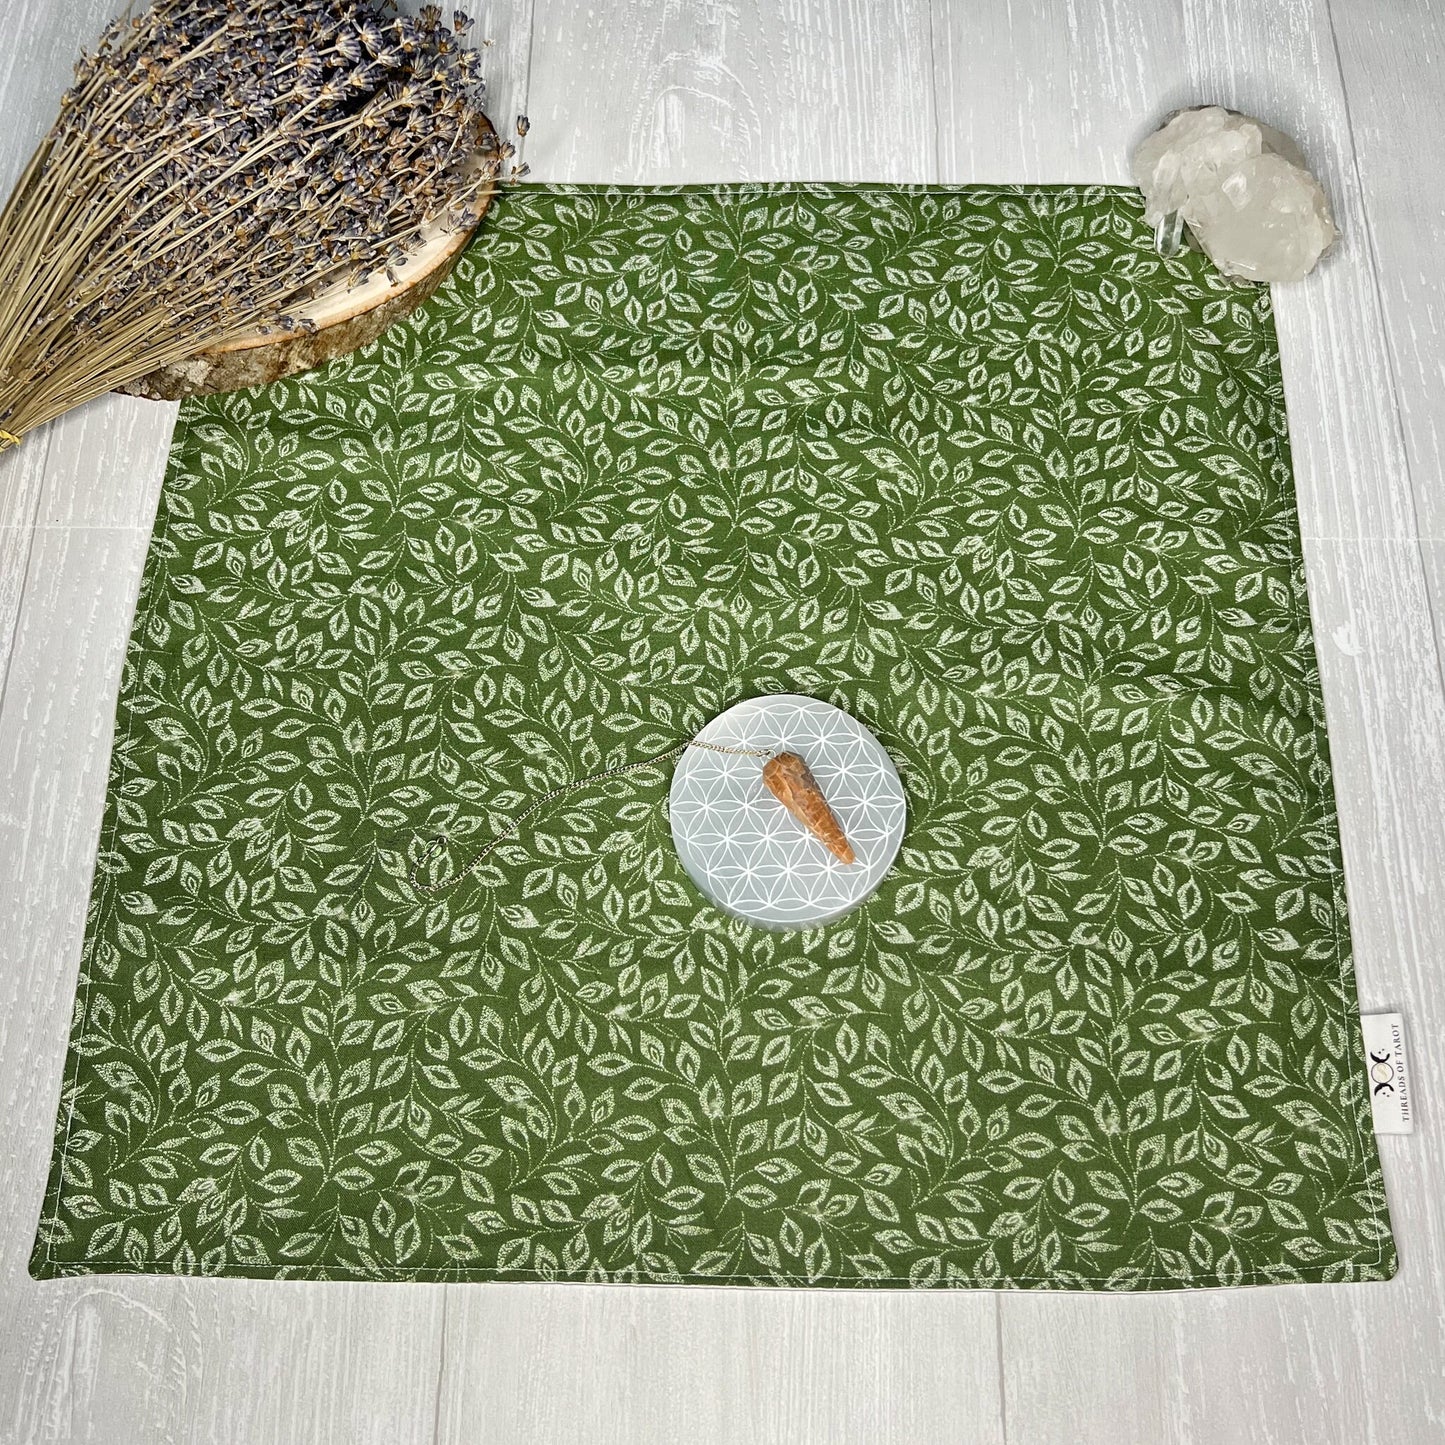 Green Altar Cloth, Floral Leaves Tarot Cloth, Tarot Reading Supplies and Accessories, Charm Rune Casting Cloth, Witch Tarot Reader Gifts